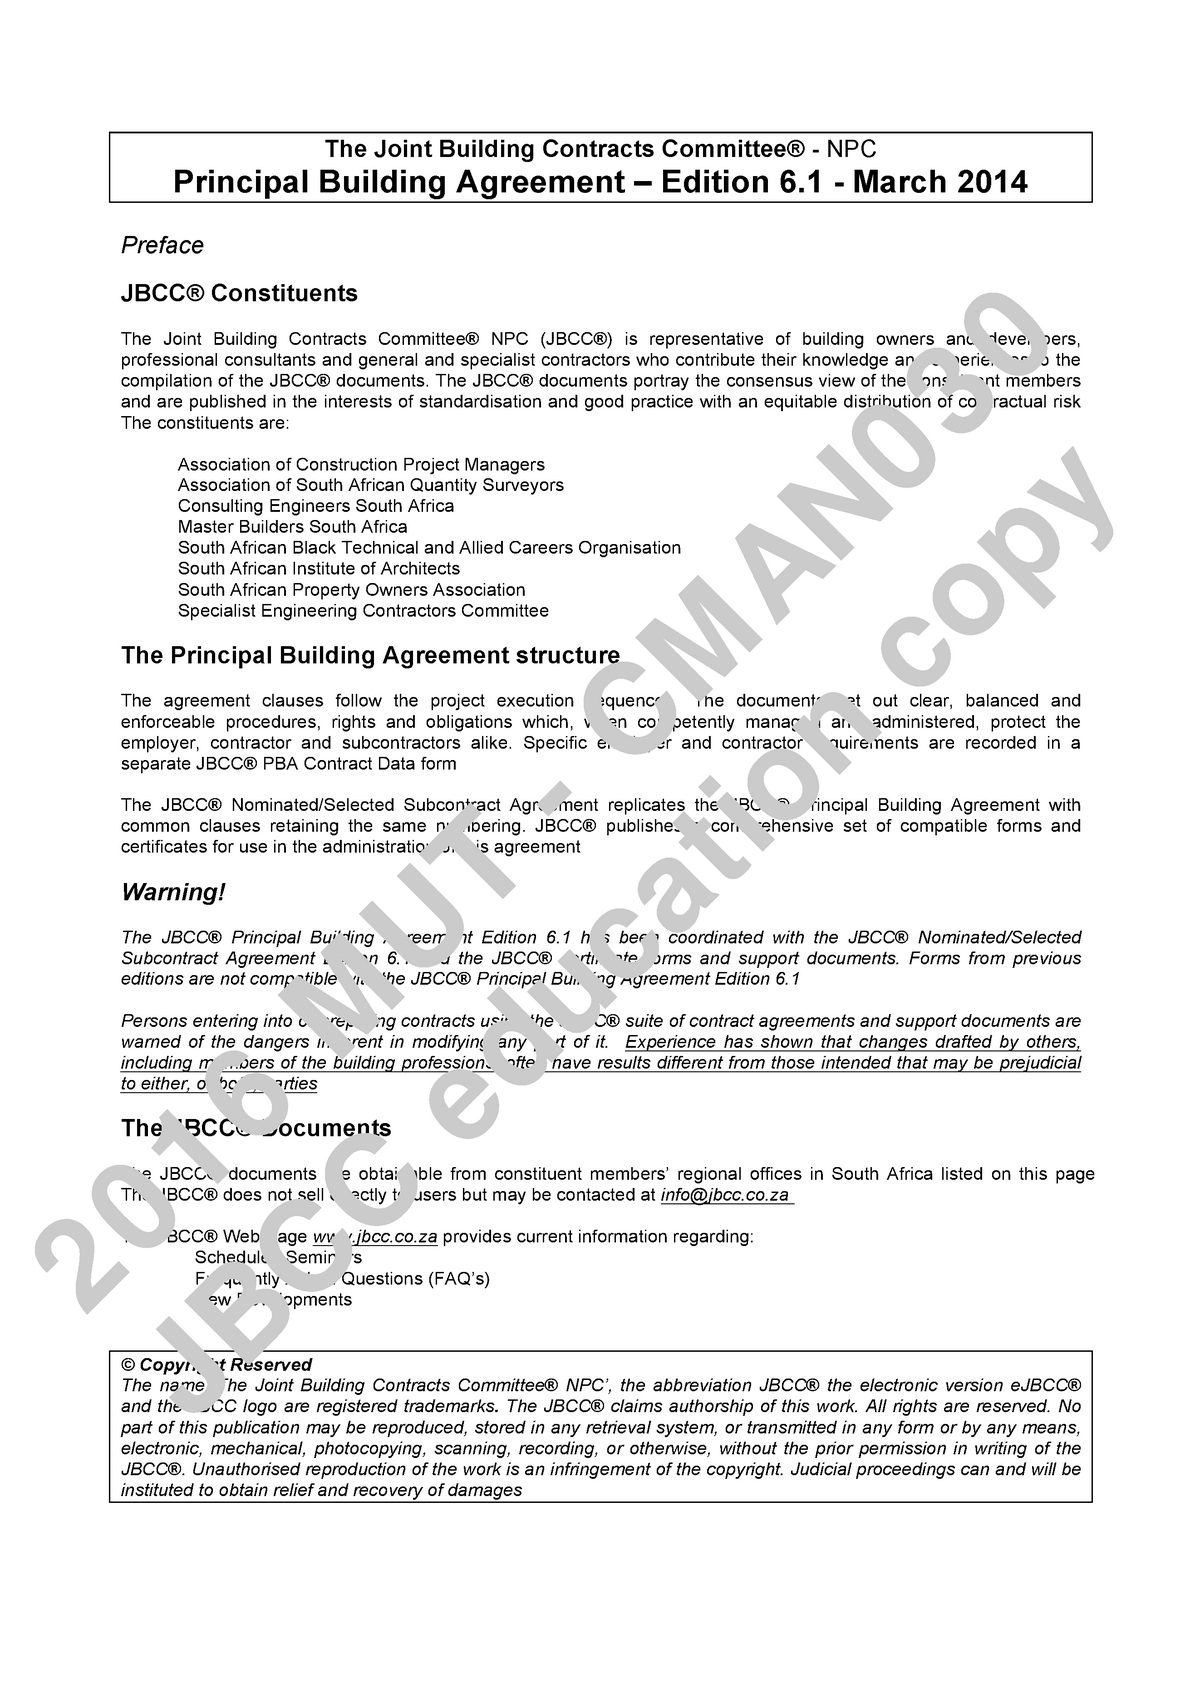 JBCC PBA Contract Document The Joint Building Contracts Committee